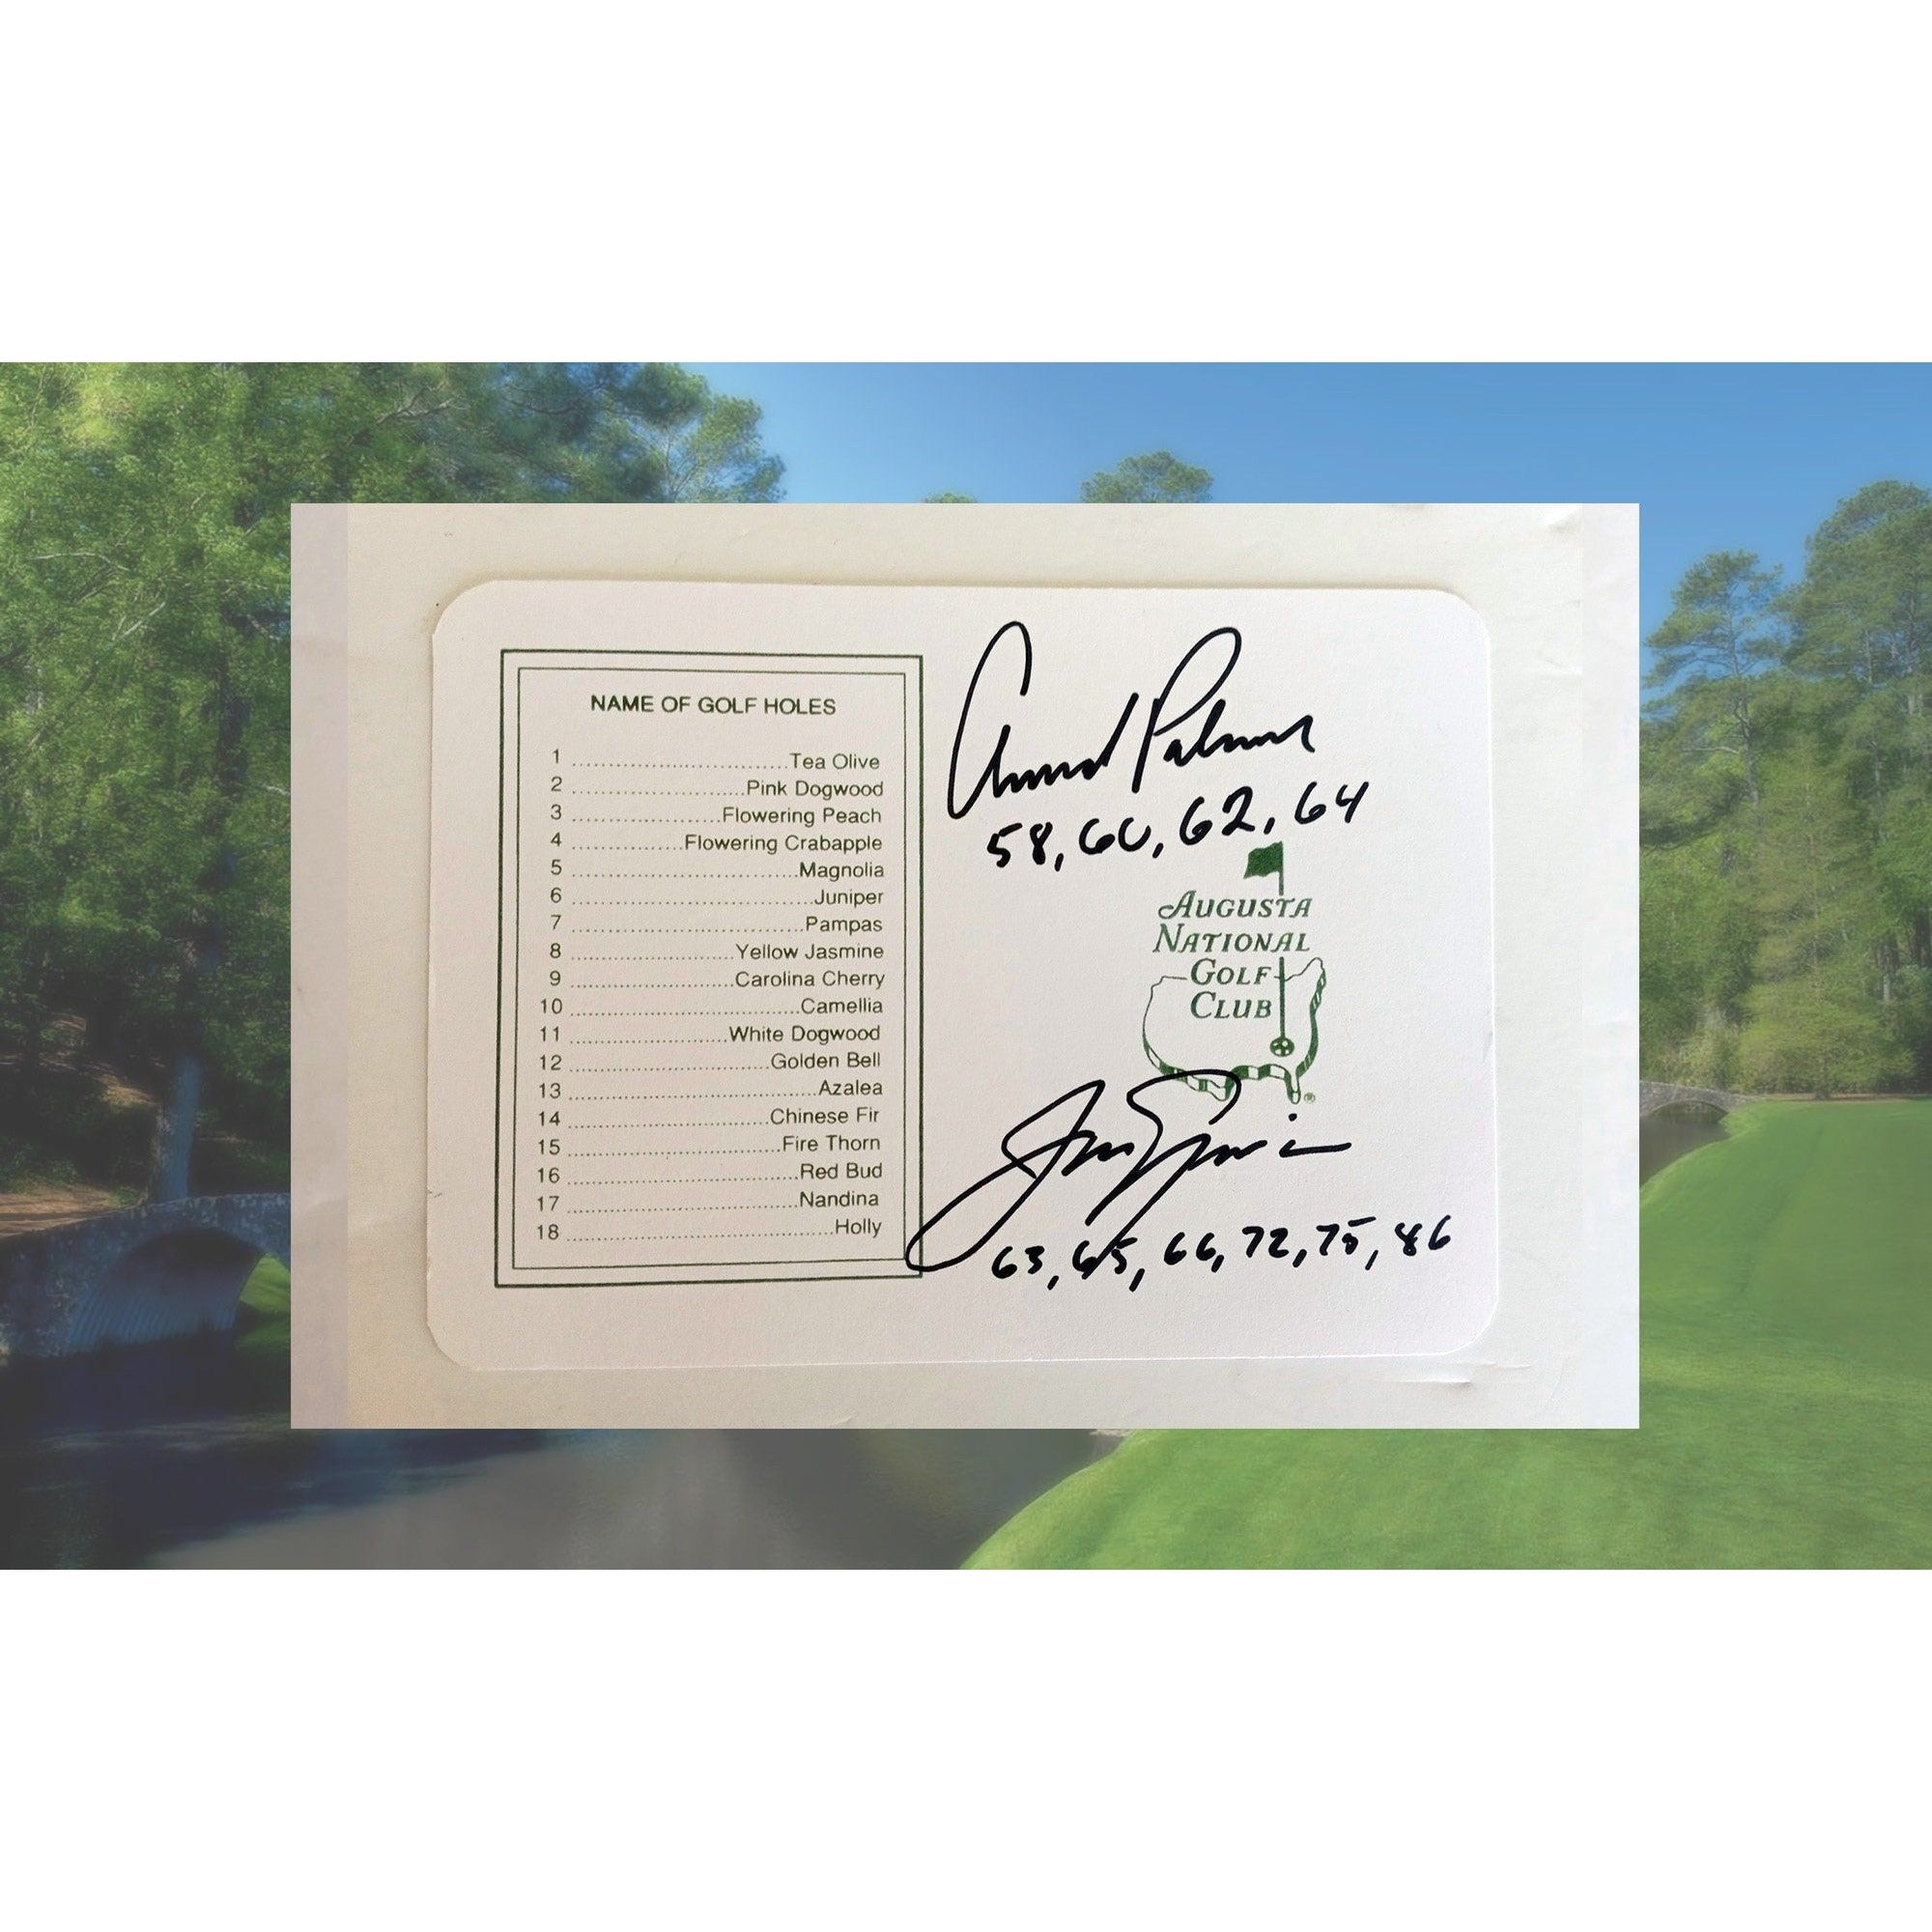 Jack Nicklaus and Arnold Palmer Masters inscribed and signed score card with proof